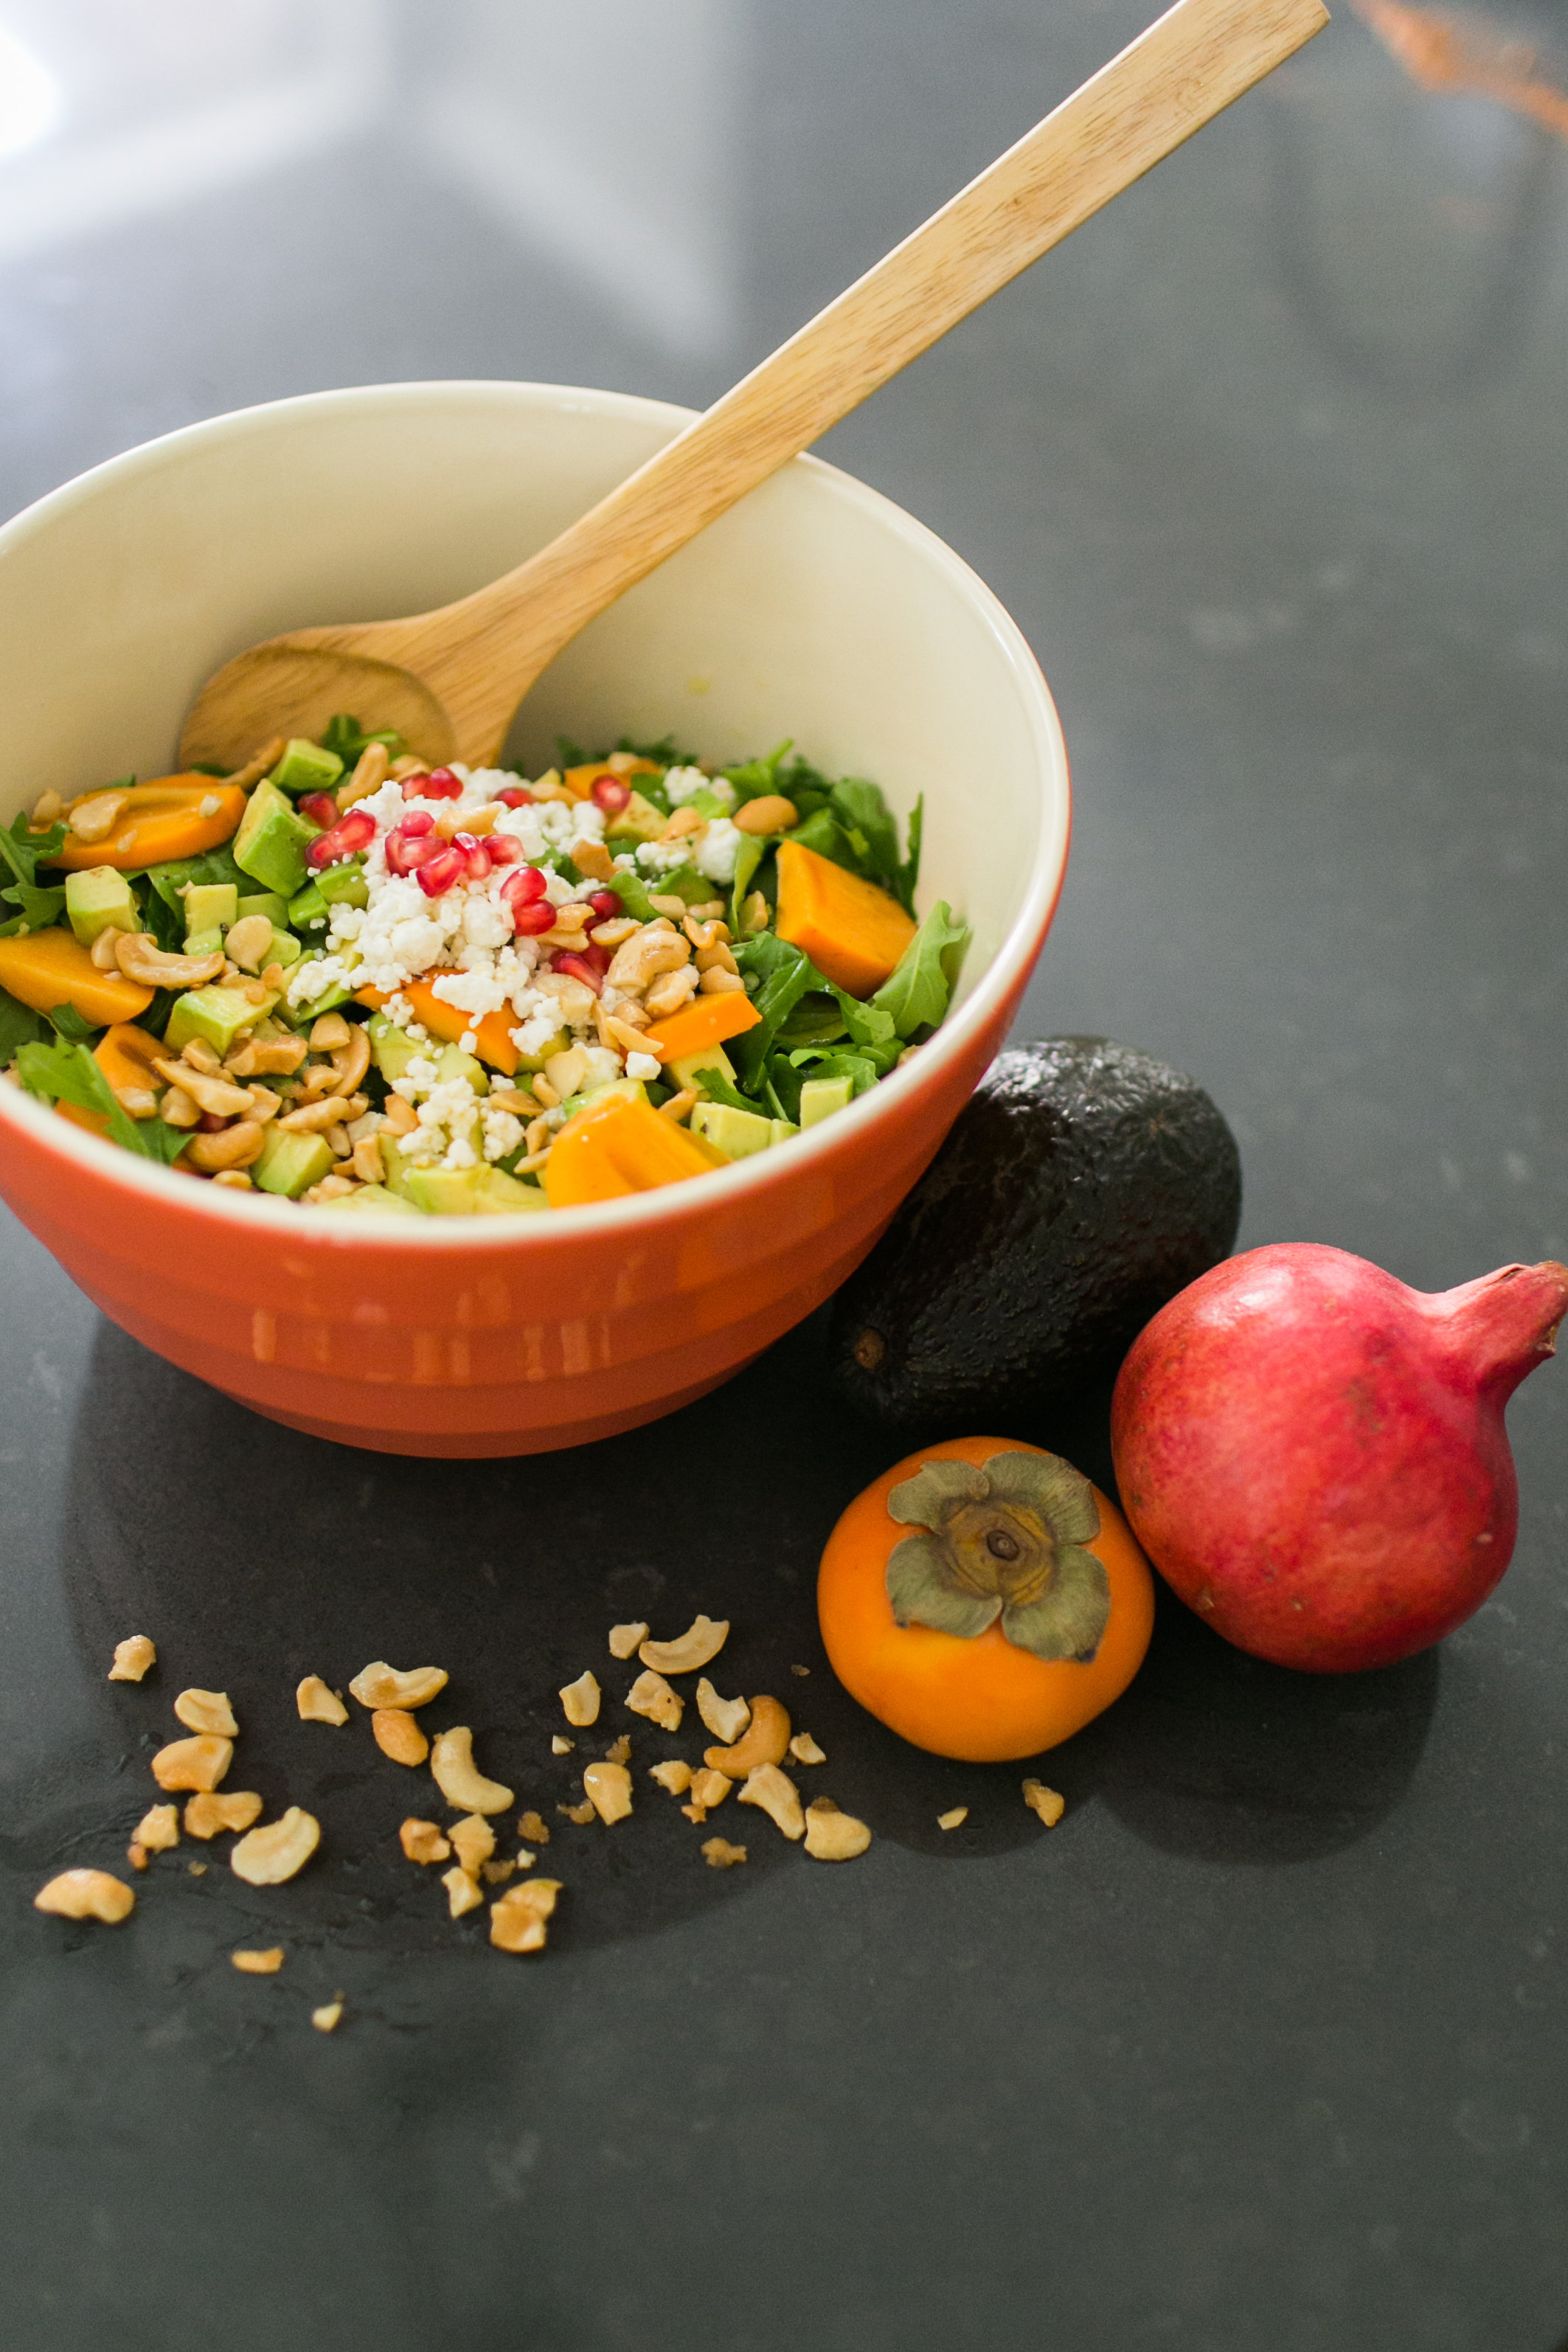 Arugula & Persimmons Fall Salad with Candied Cashews